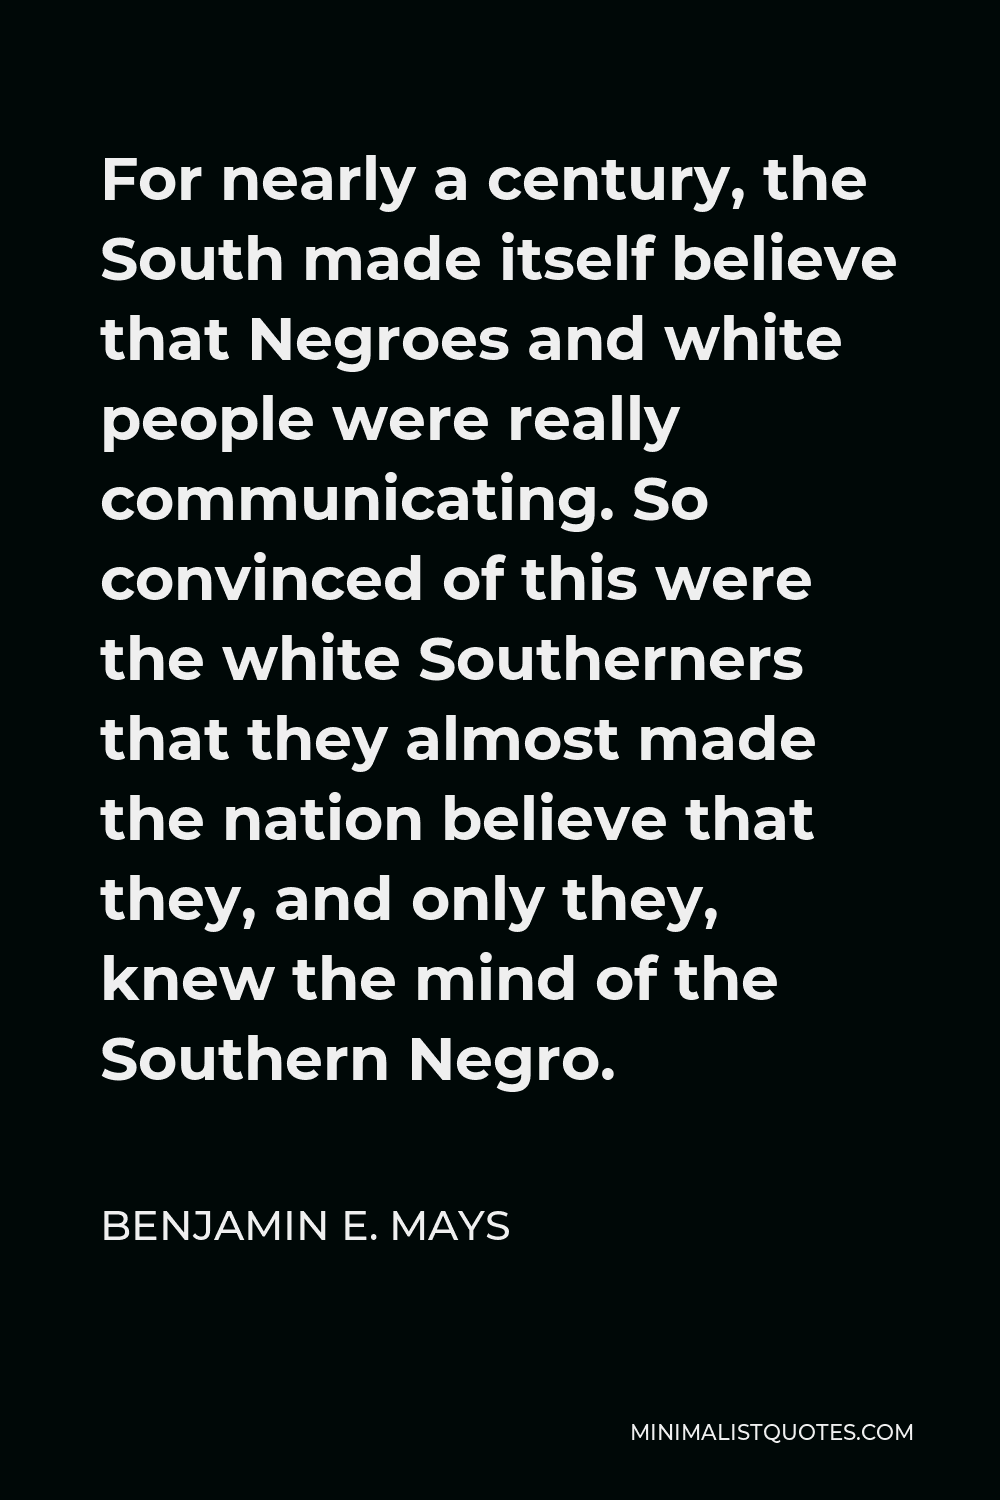 Benjamin E. Mays Quote - For nearly a century, the South made itself believe that Negroes and white people were really communicating. So convinced of this were the white Southerners that they almost made the nation believe that they, and only they, knew the mind of the Southern Negro.